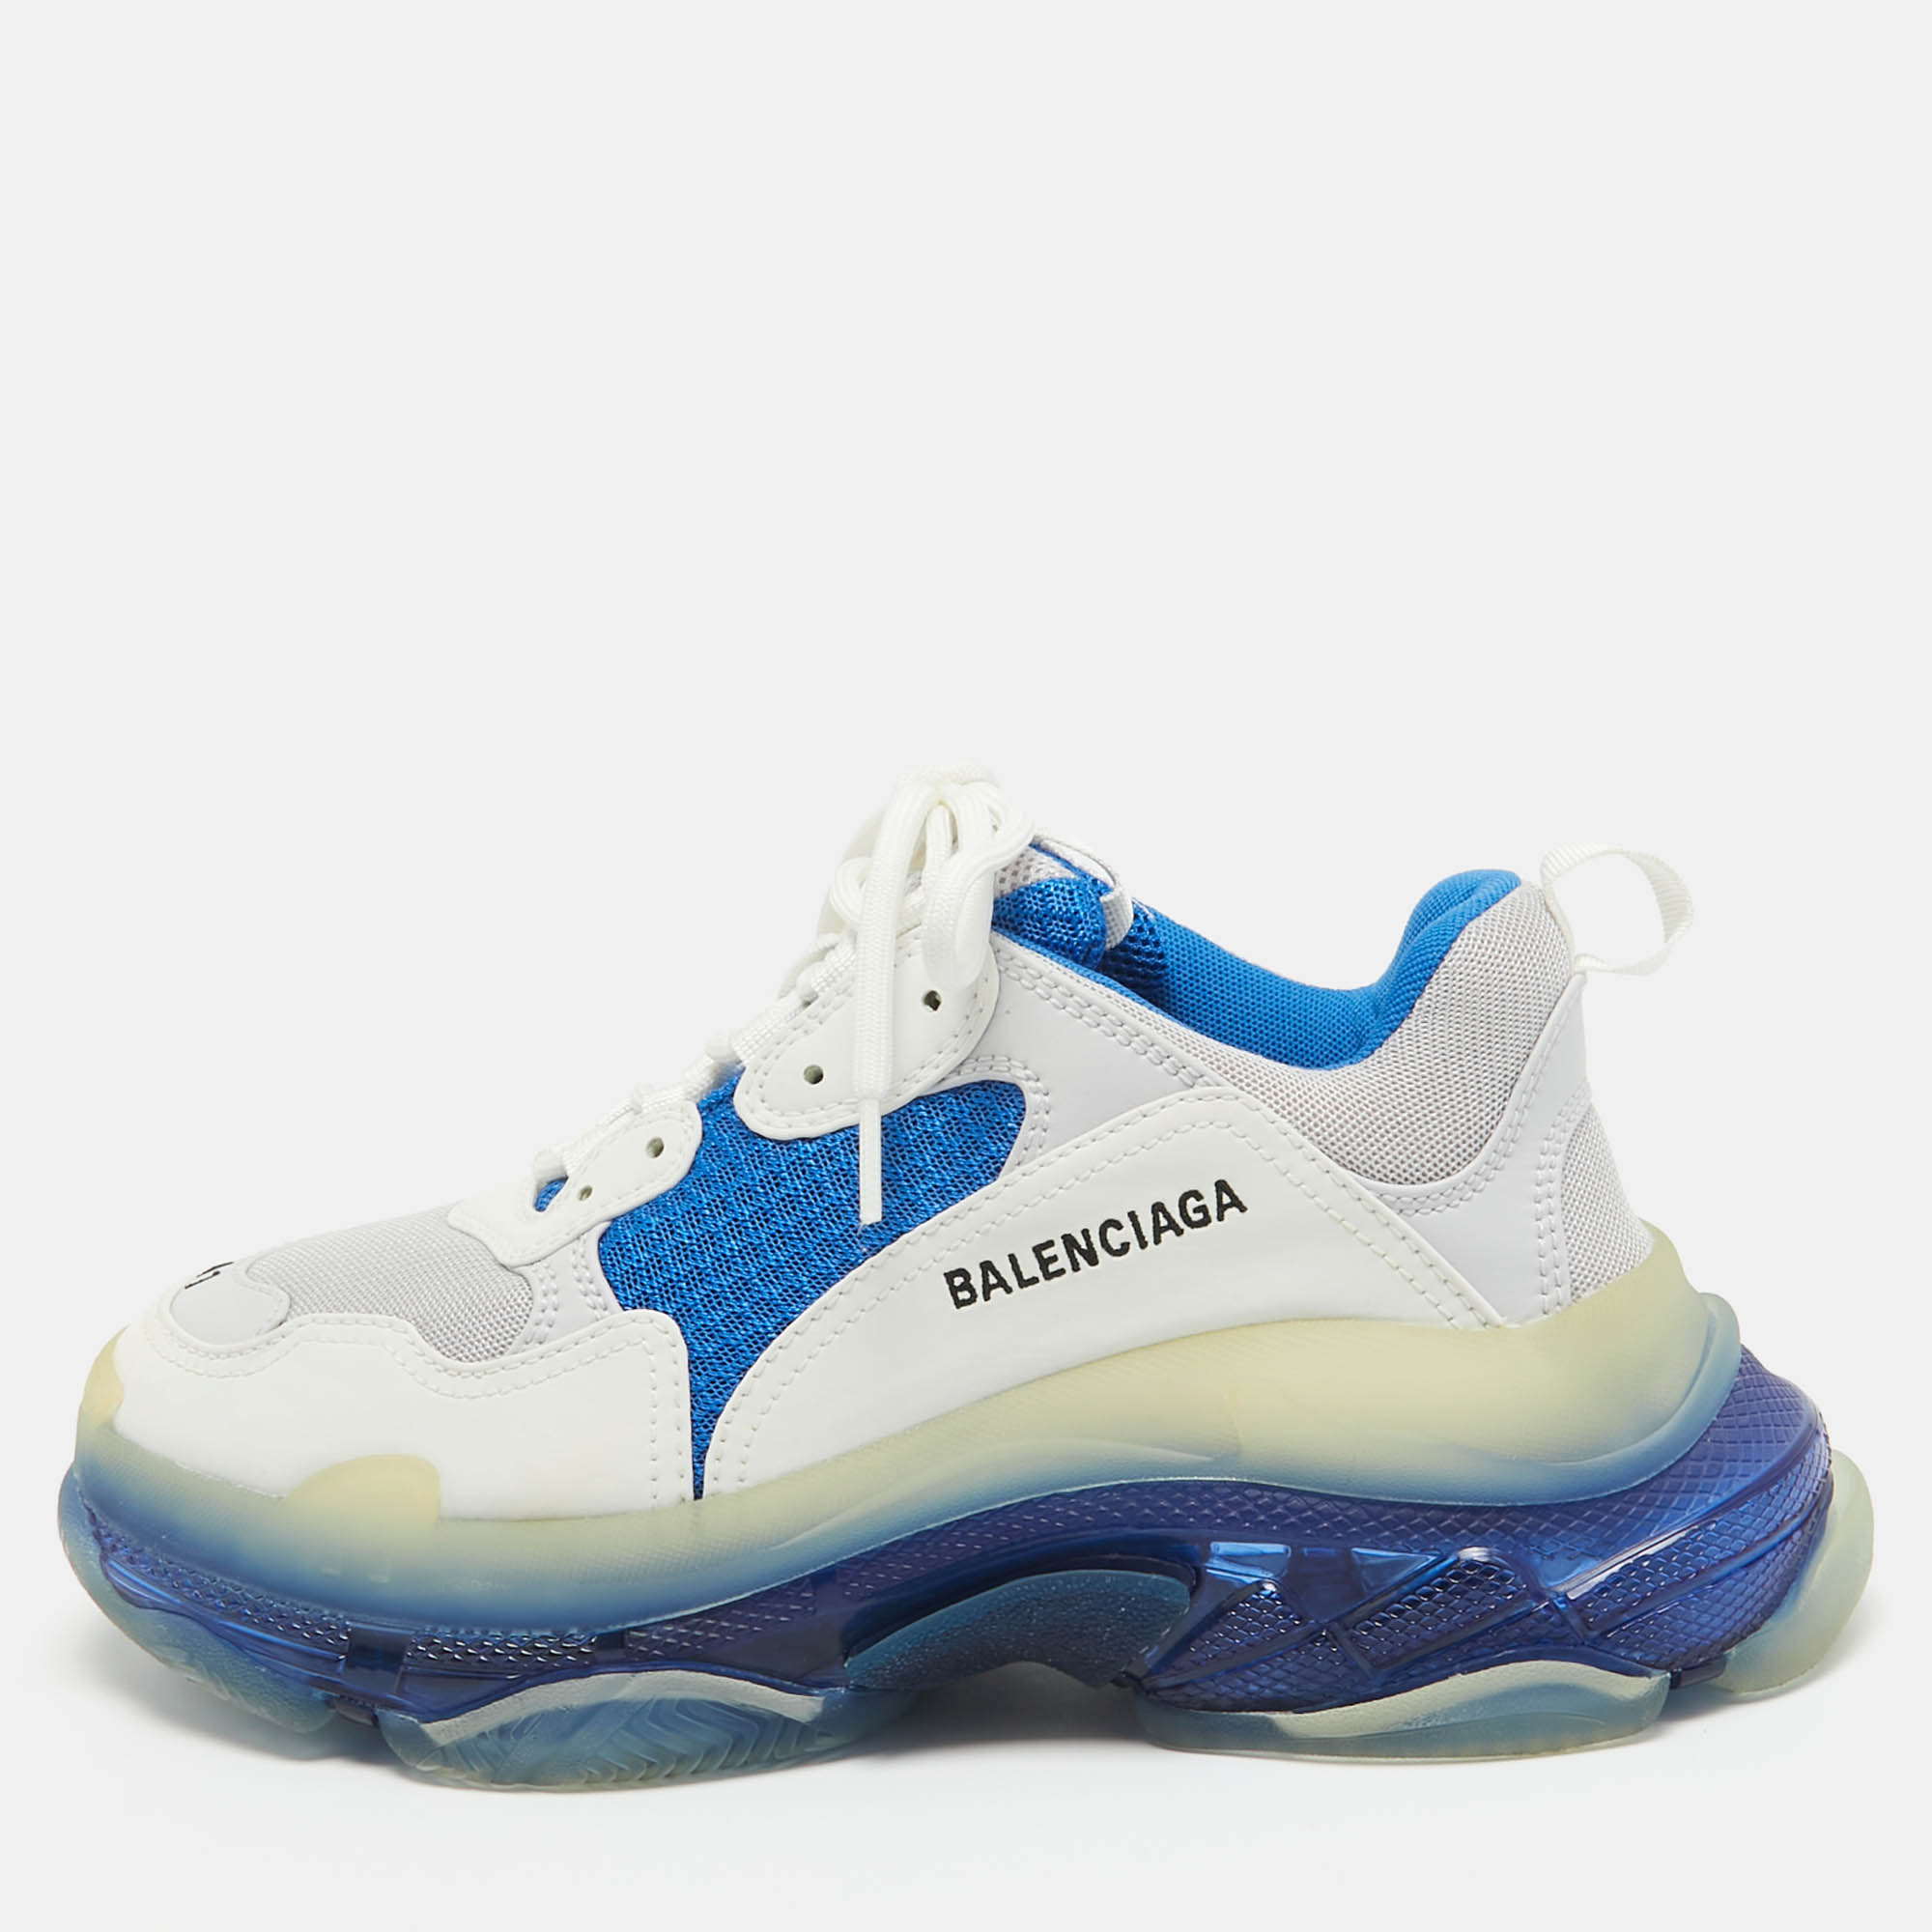 

Balenciaga White/Blue Leather and Mesh Triple S Clear Sole Sneakers Size